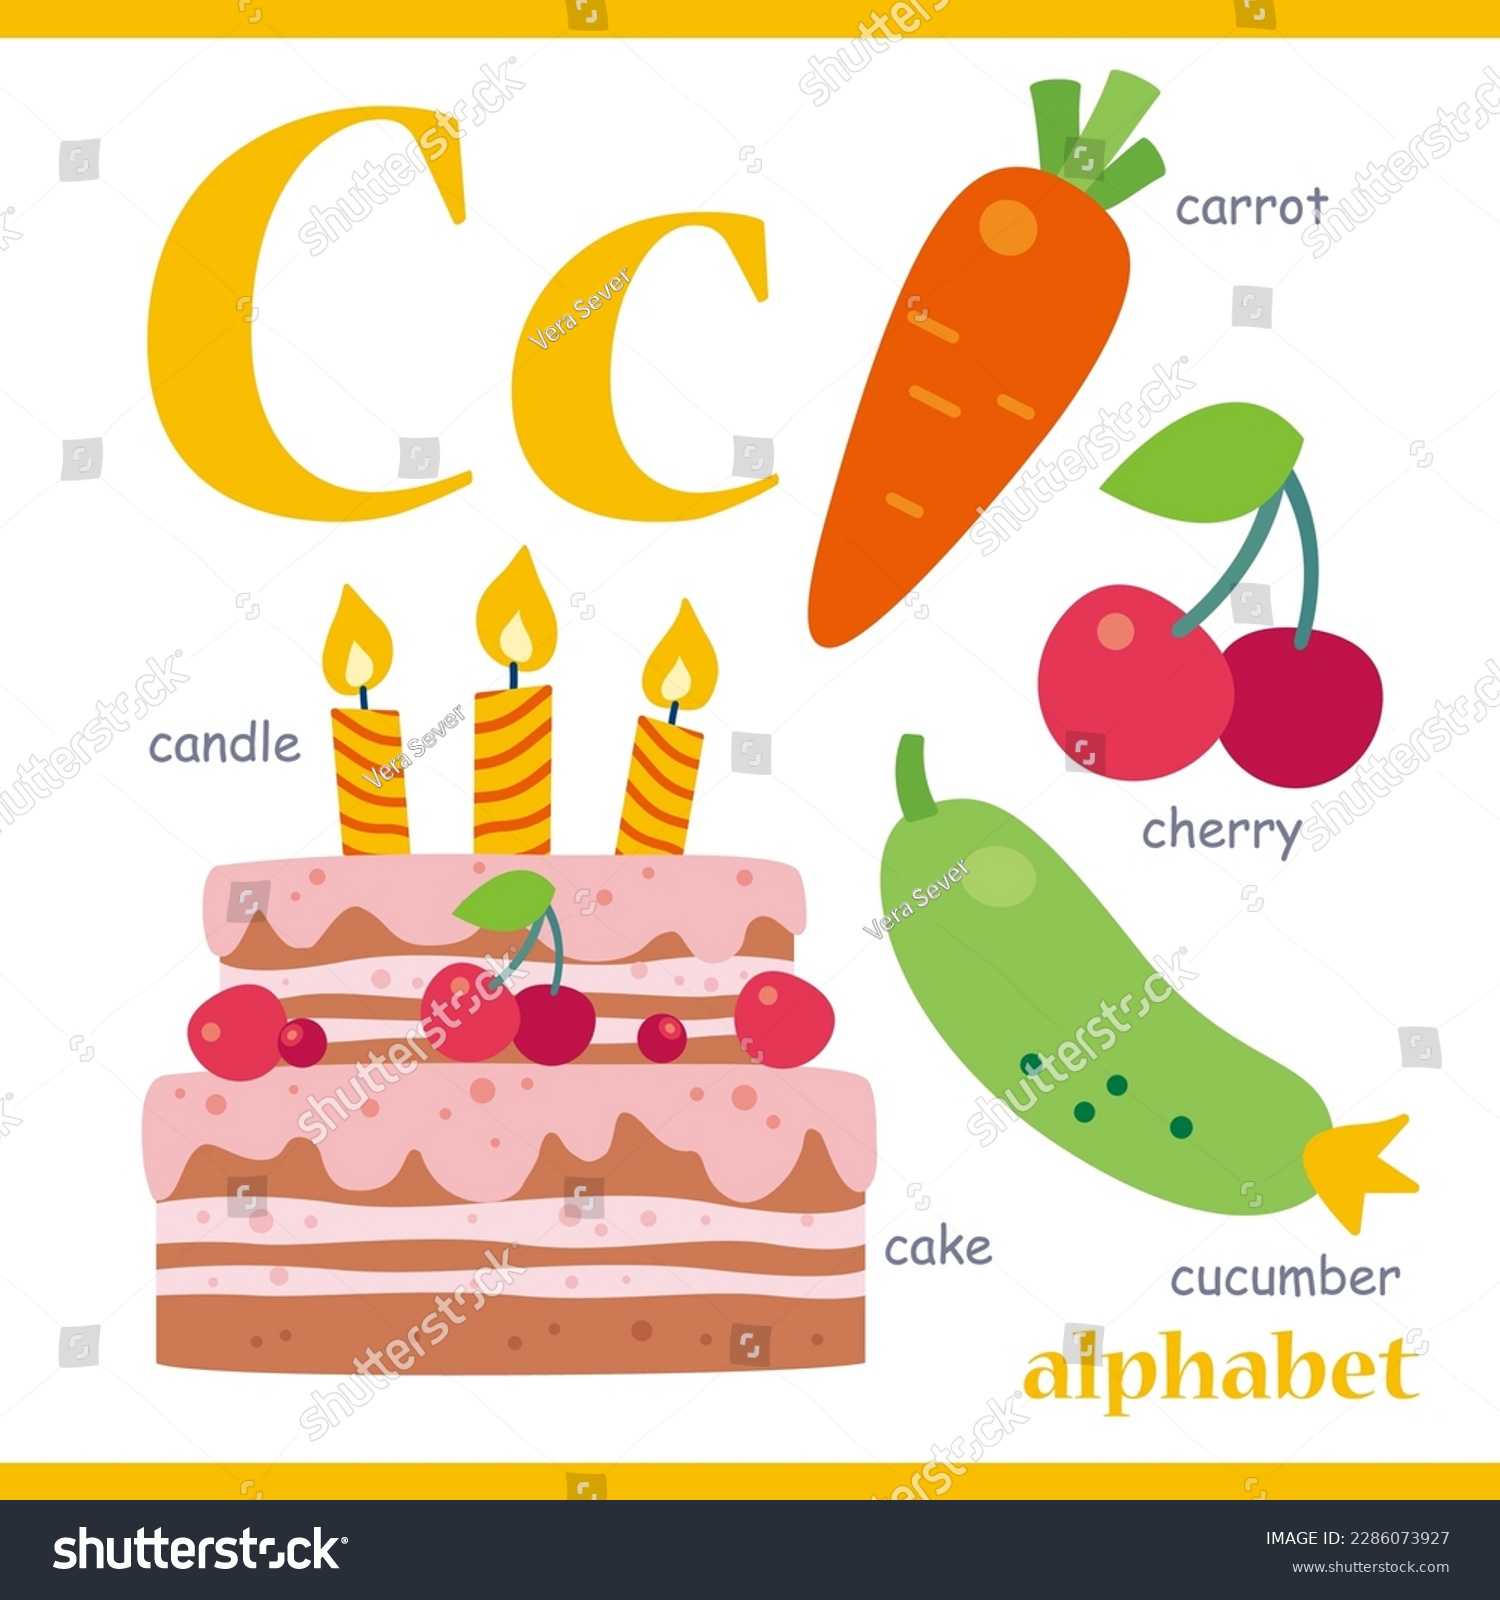 SVG of Alphabet letter C with cartoon vocabulary illustration: carrot, cherry, cucumber, cake, candle. Cute children ABC alphabet flash card with letter C for kids learning English vocabulary. svg